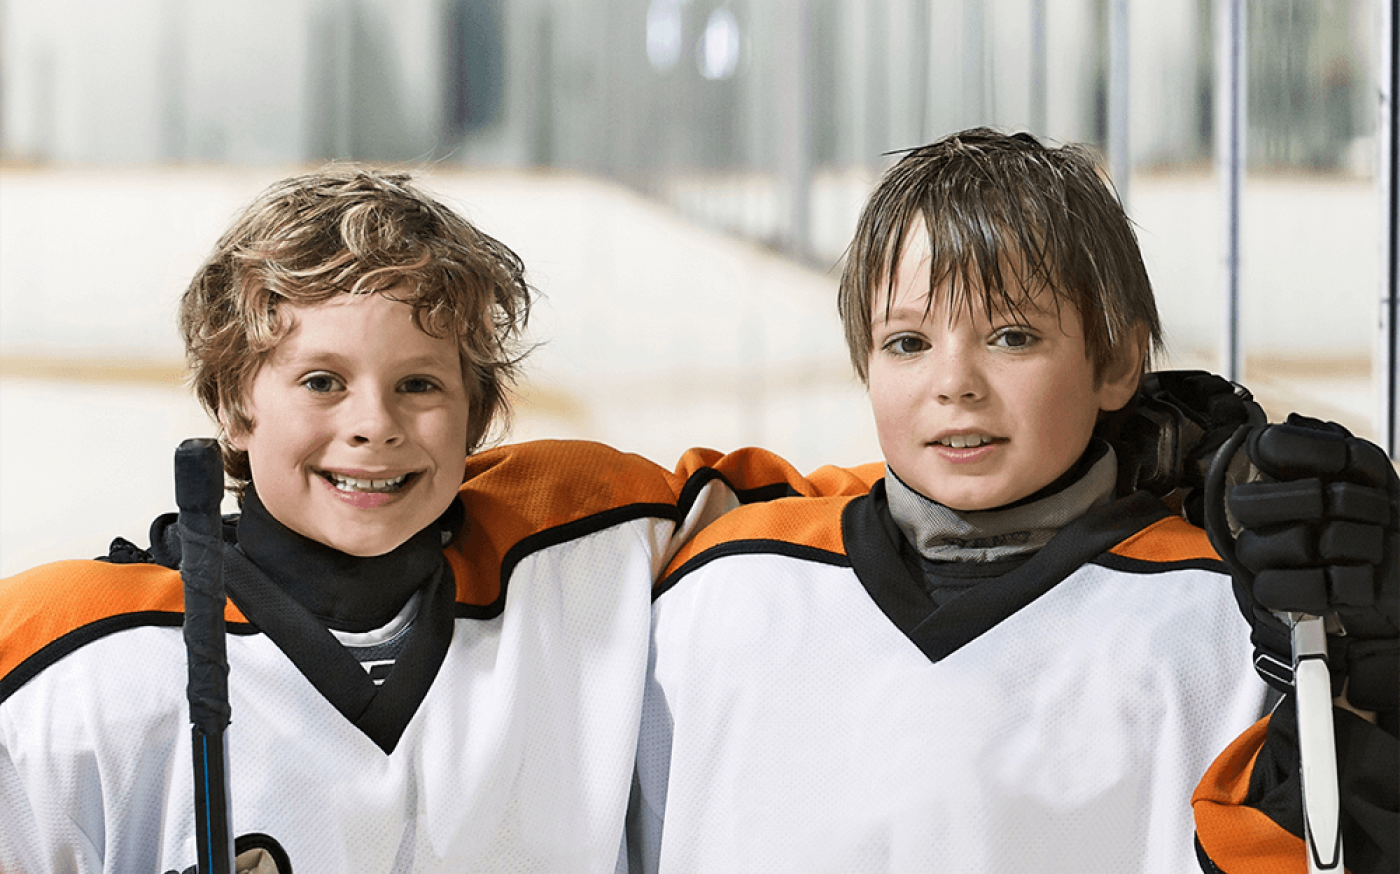 Supporting young athletes on the ice